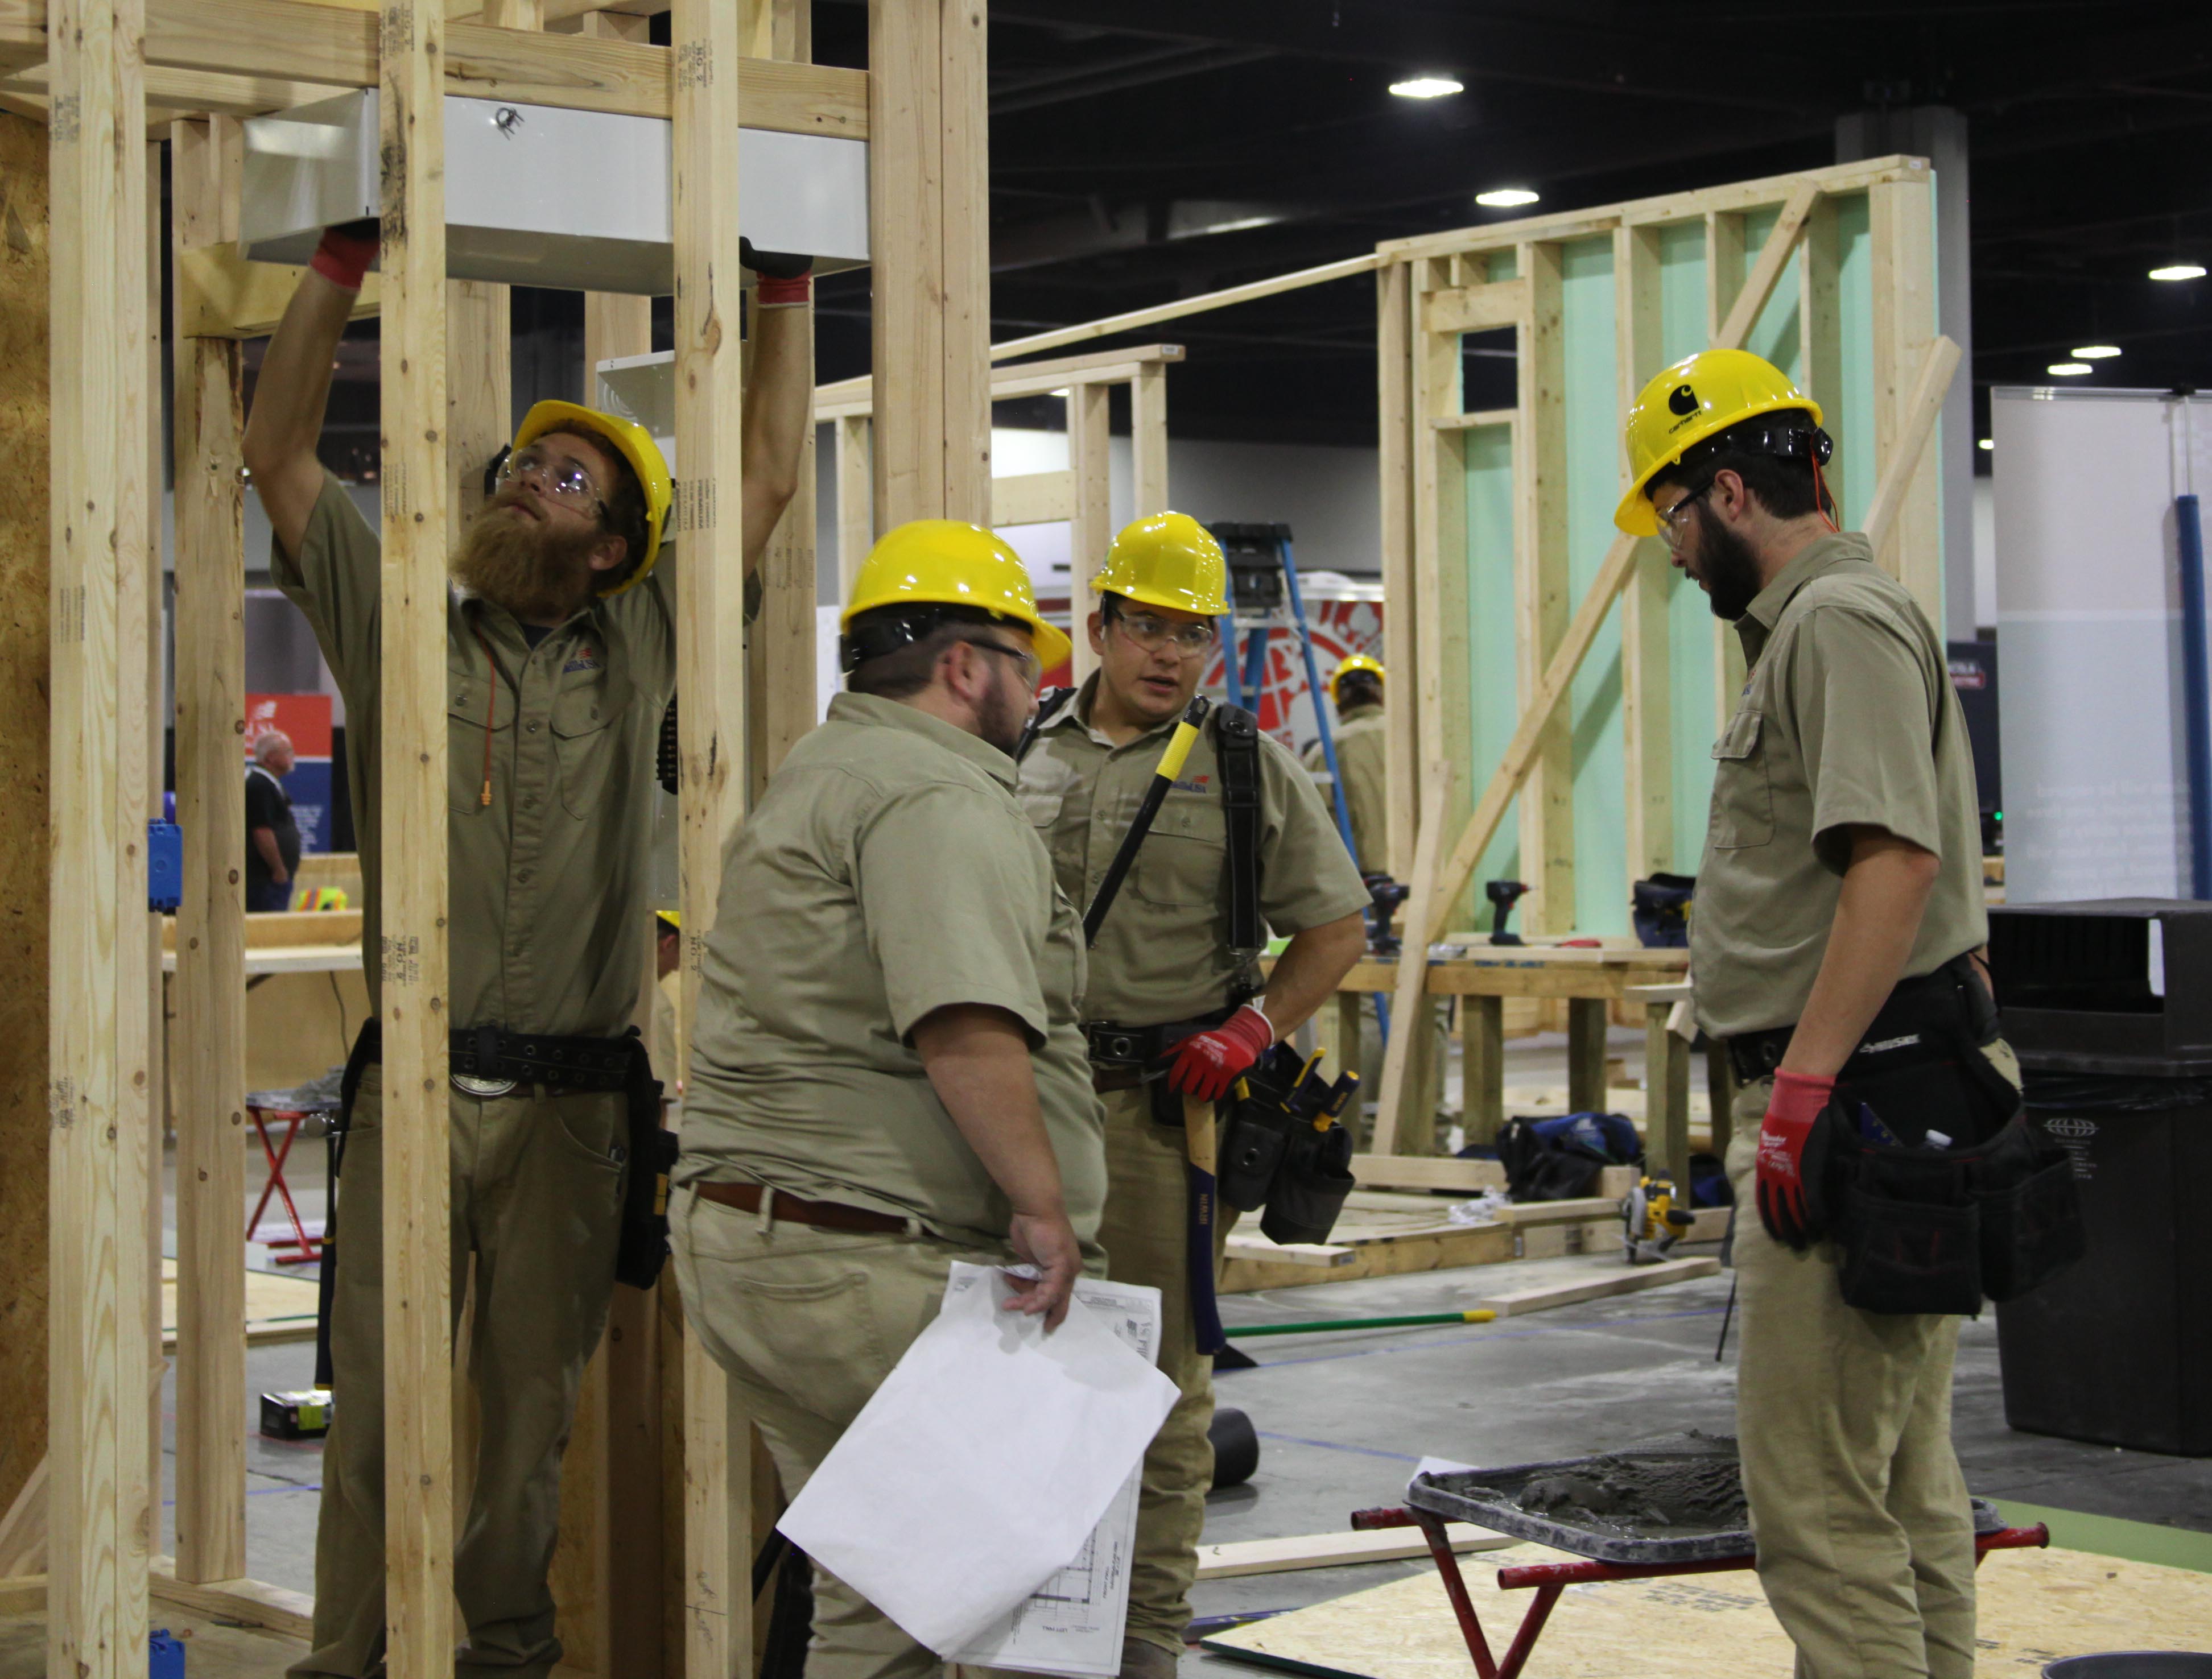 (From left) Trey Posey, Tyler West, Leonardo Garcia and Finn White assess their progress on the construction project at the SkillsUSA National Leadership and Skills Conference.